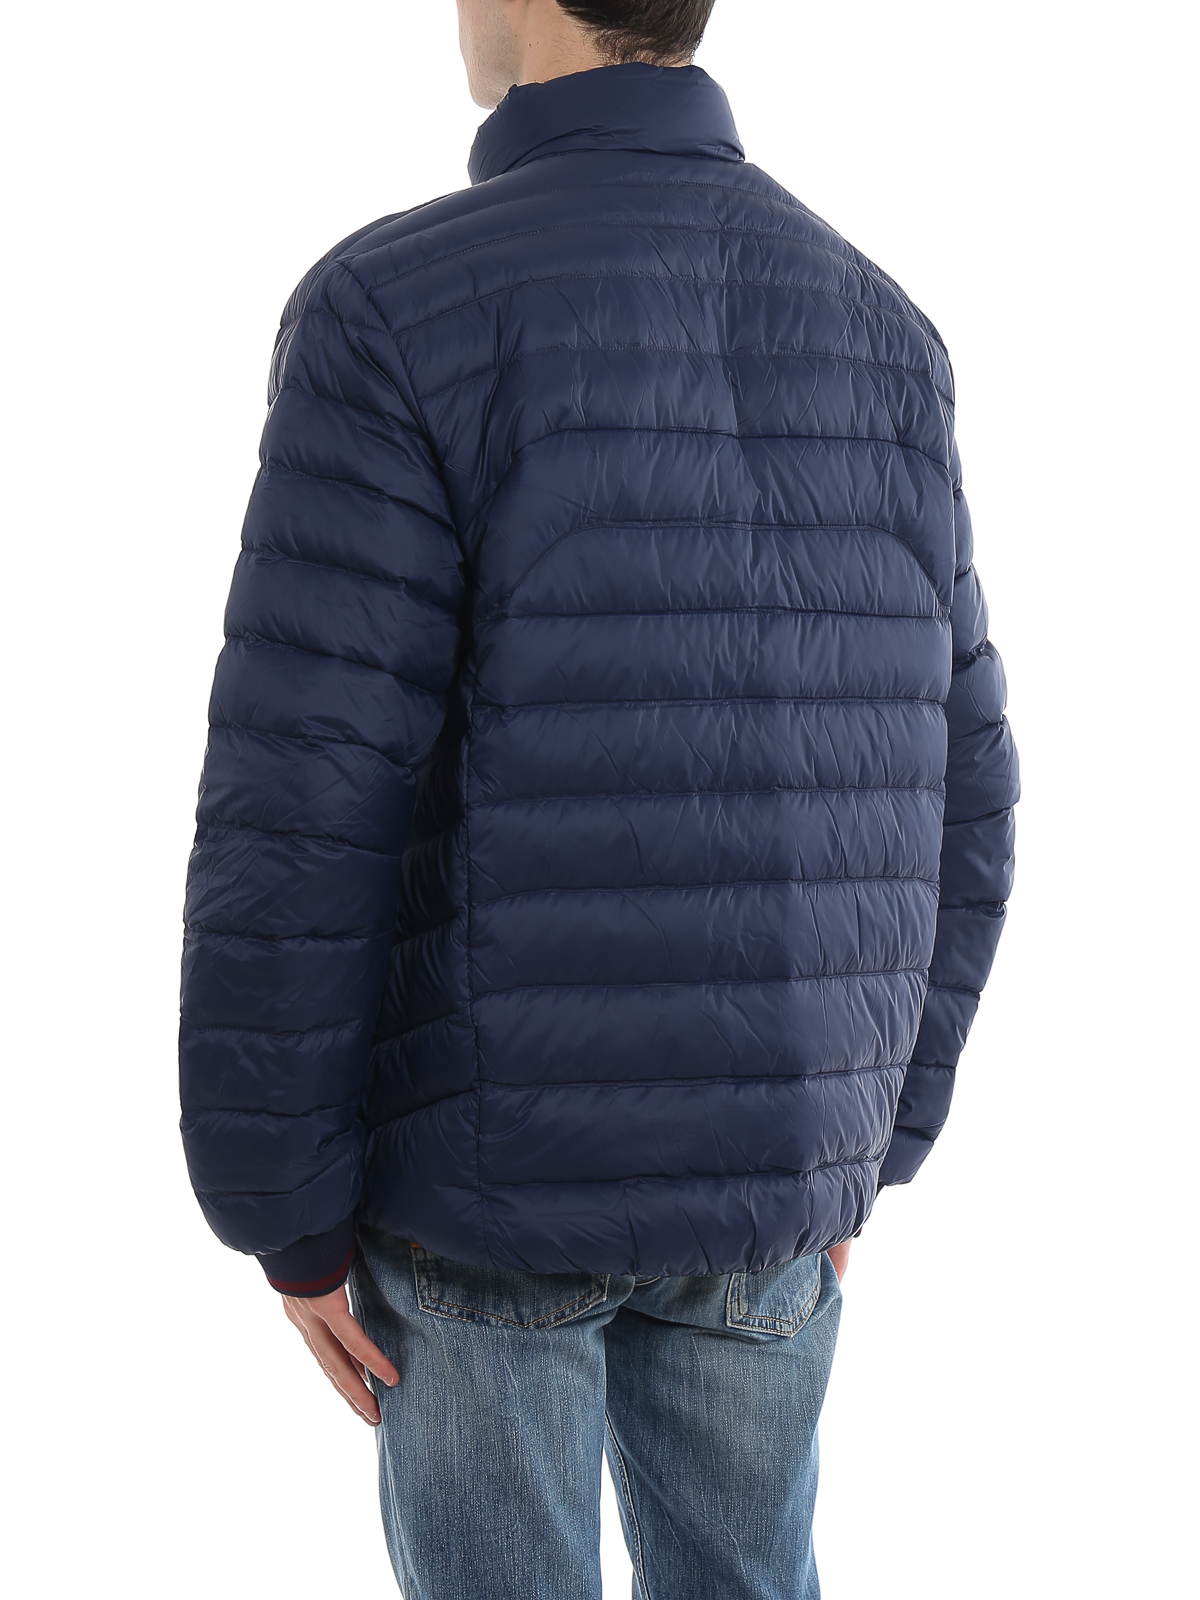 Quilted jacket with embroidered logo on the chest, Polo Ralph Lauren, navy  blue